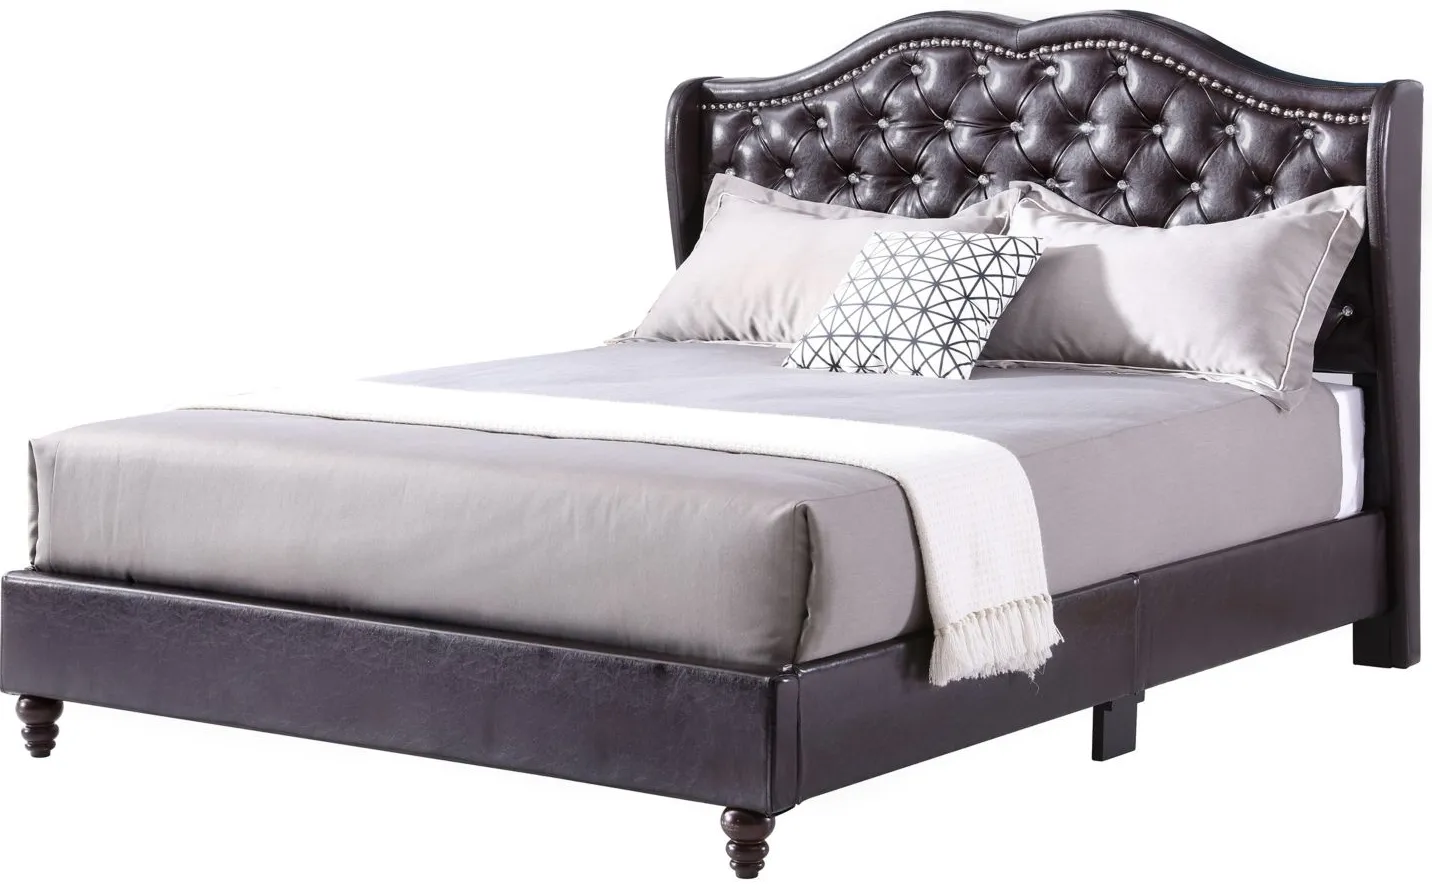 Joy Upholstered Panel Bed in Cappuccino by Glory Furniture